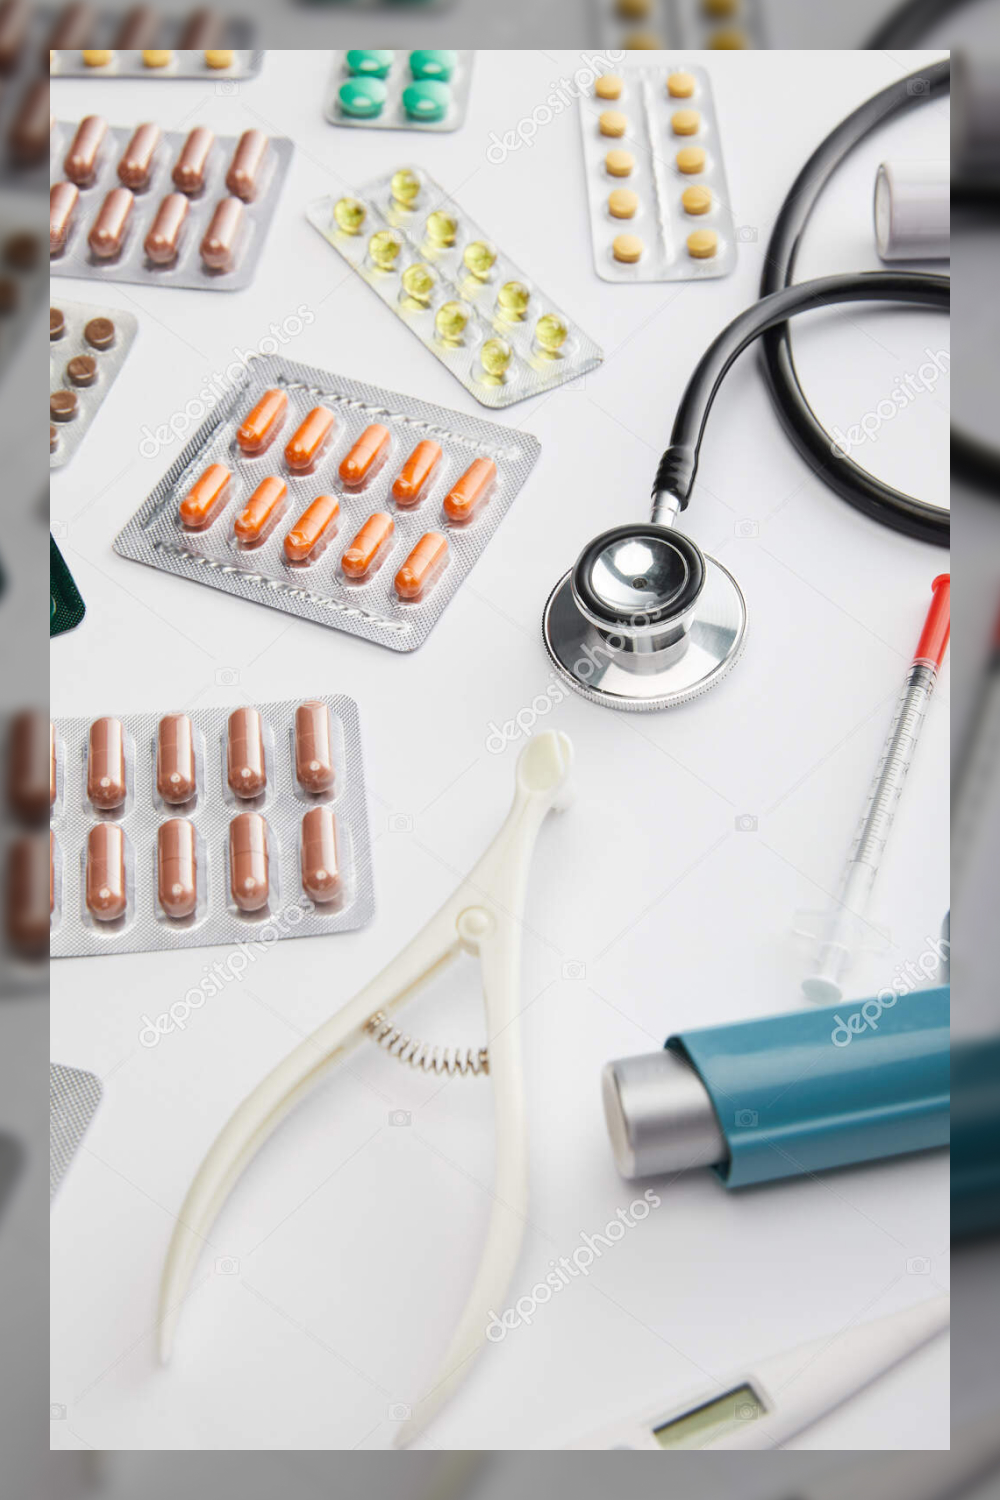 High angle view of medical objects and pills on white background.